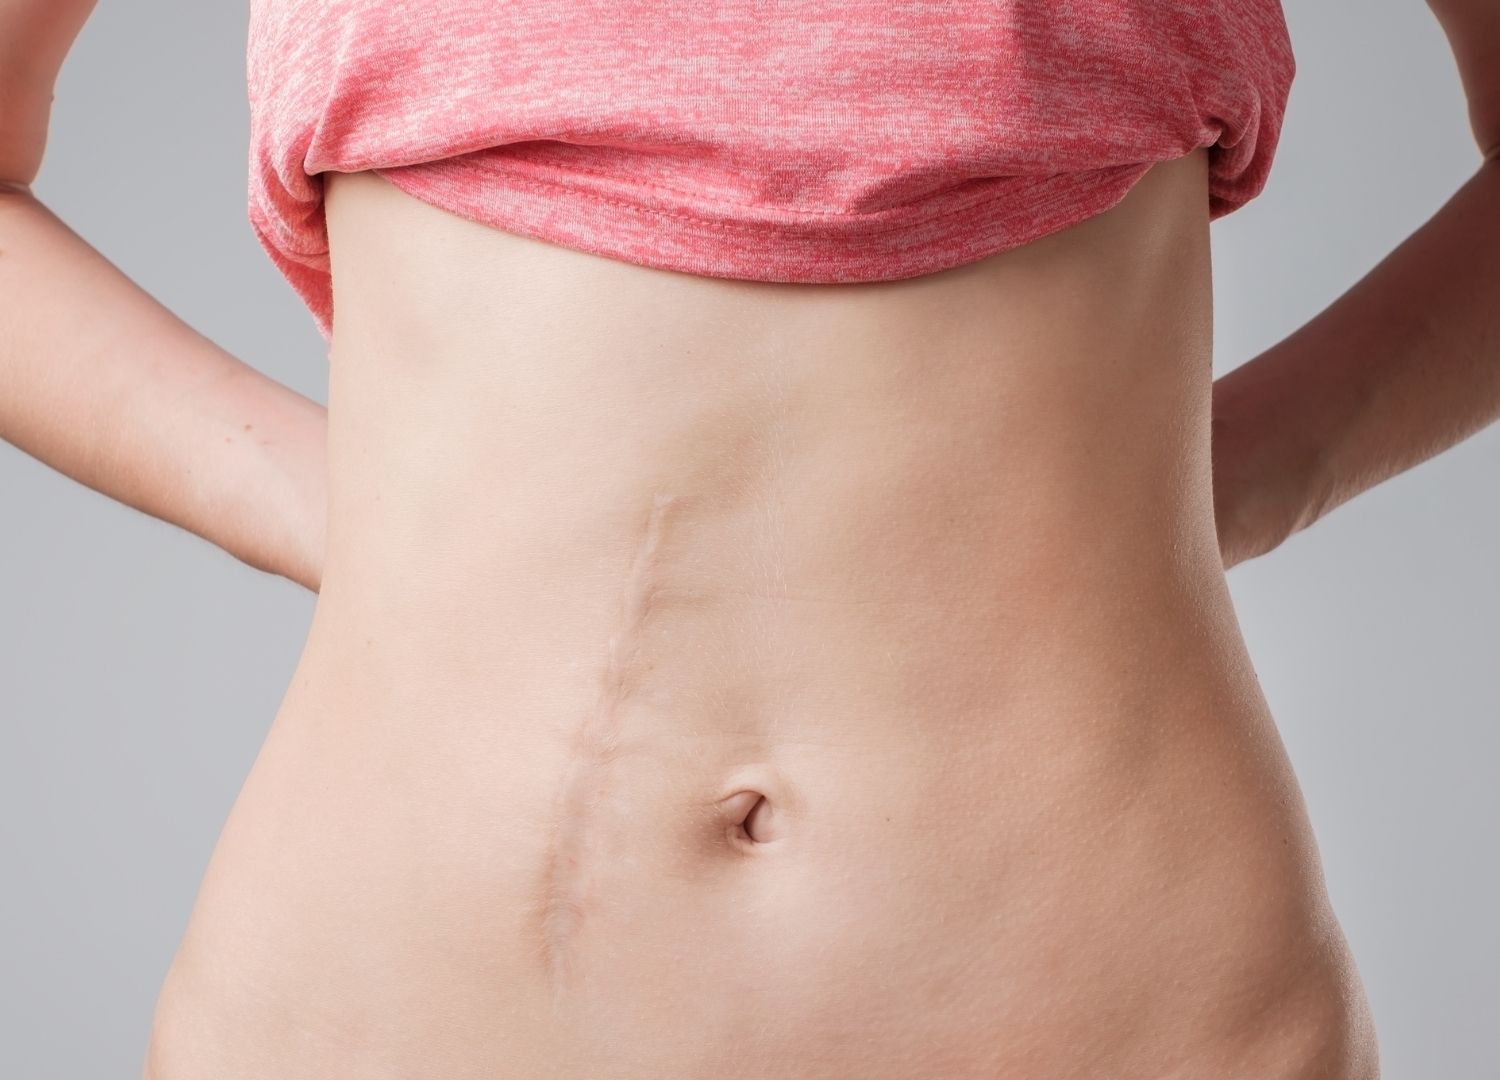 What to expect after an abdominal surgery